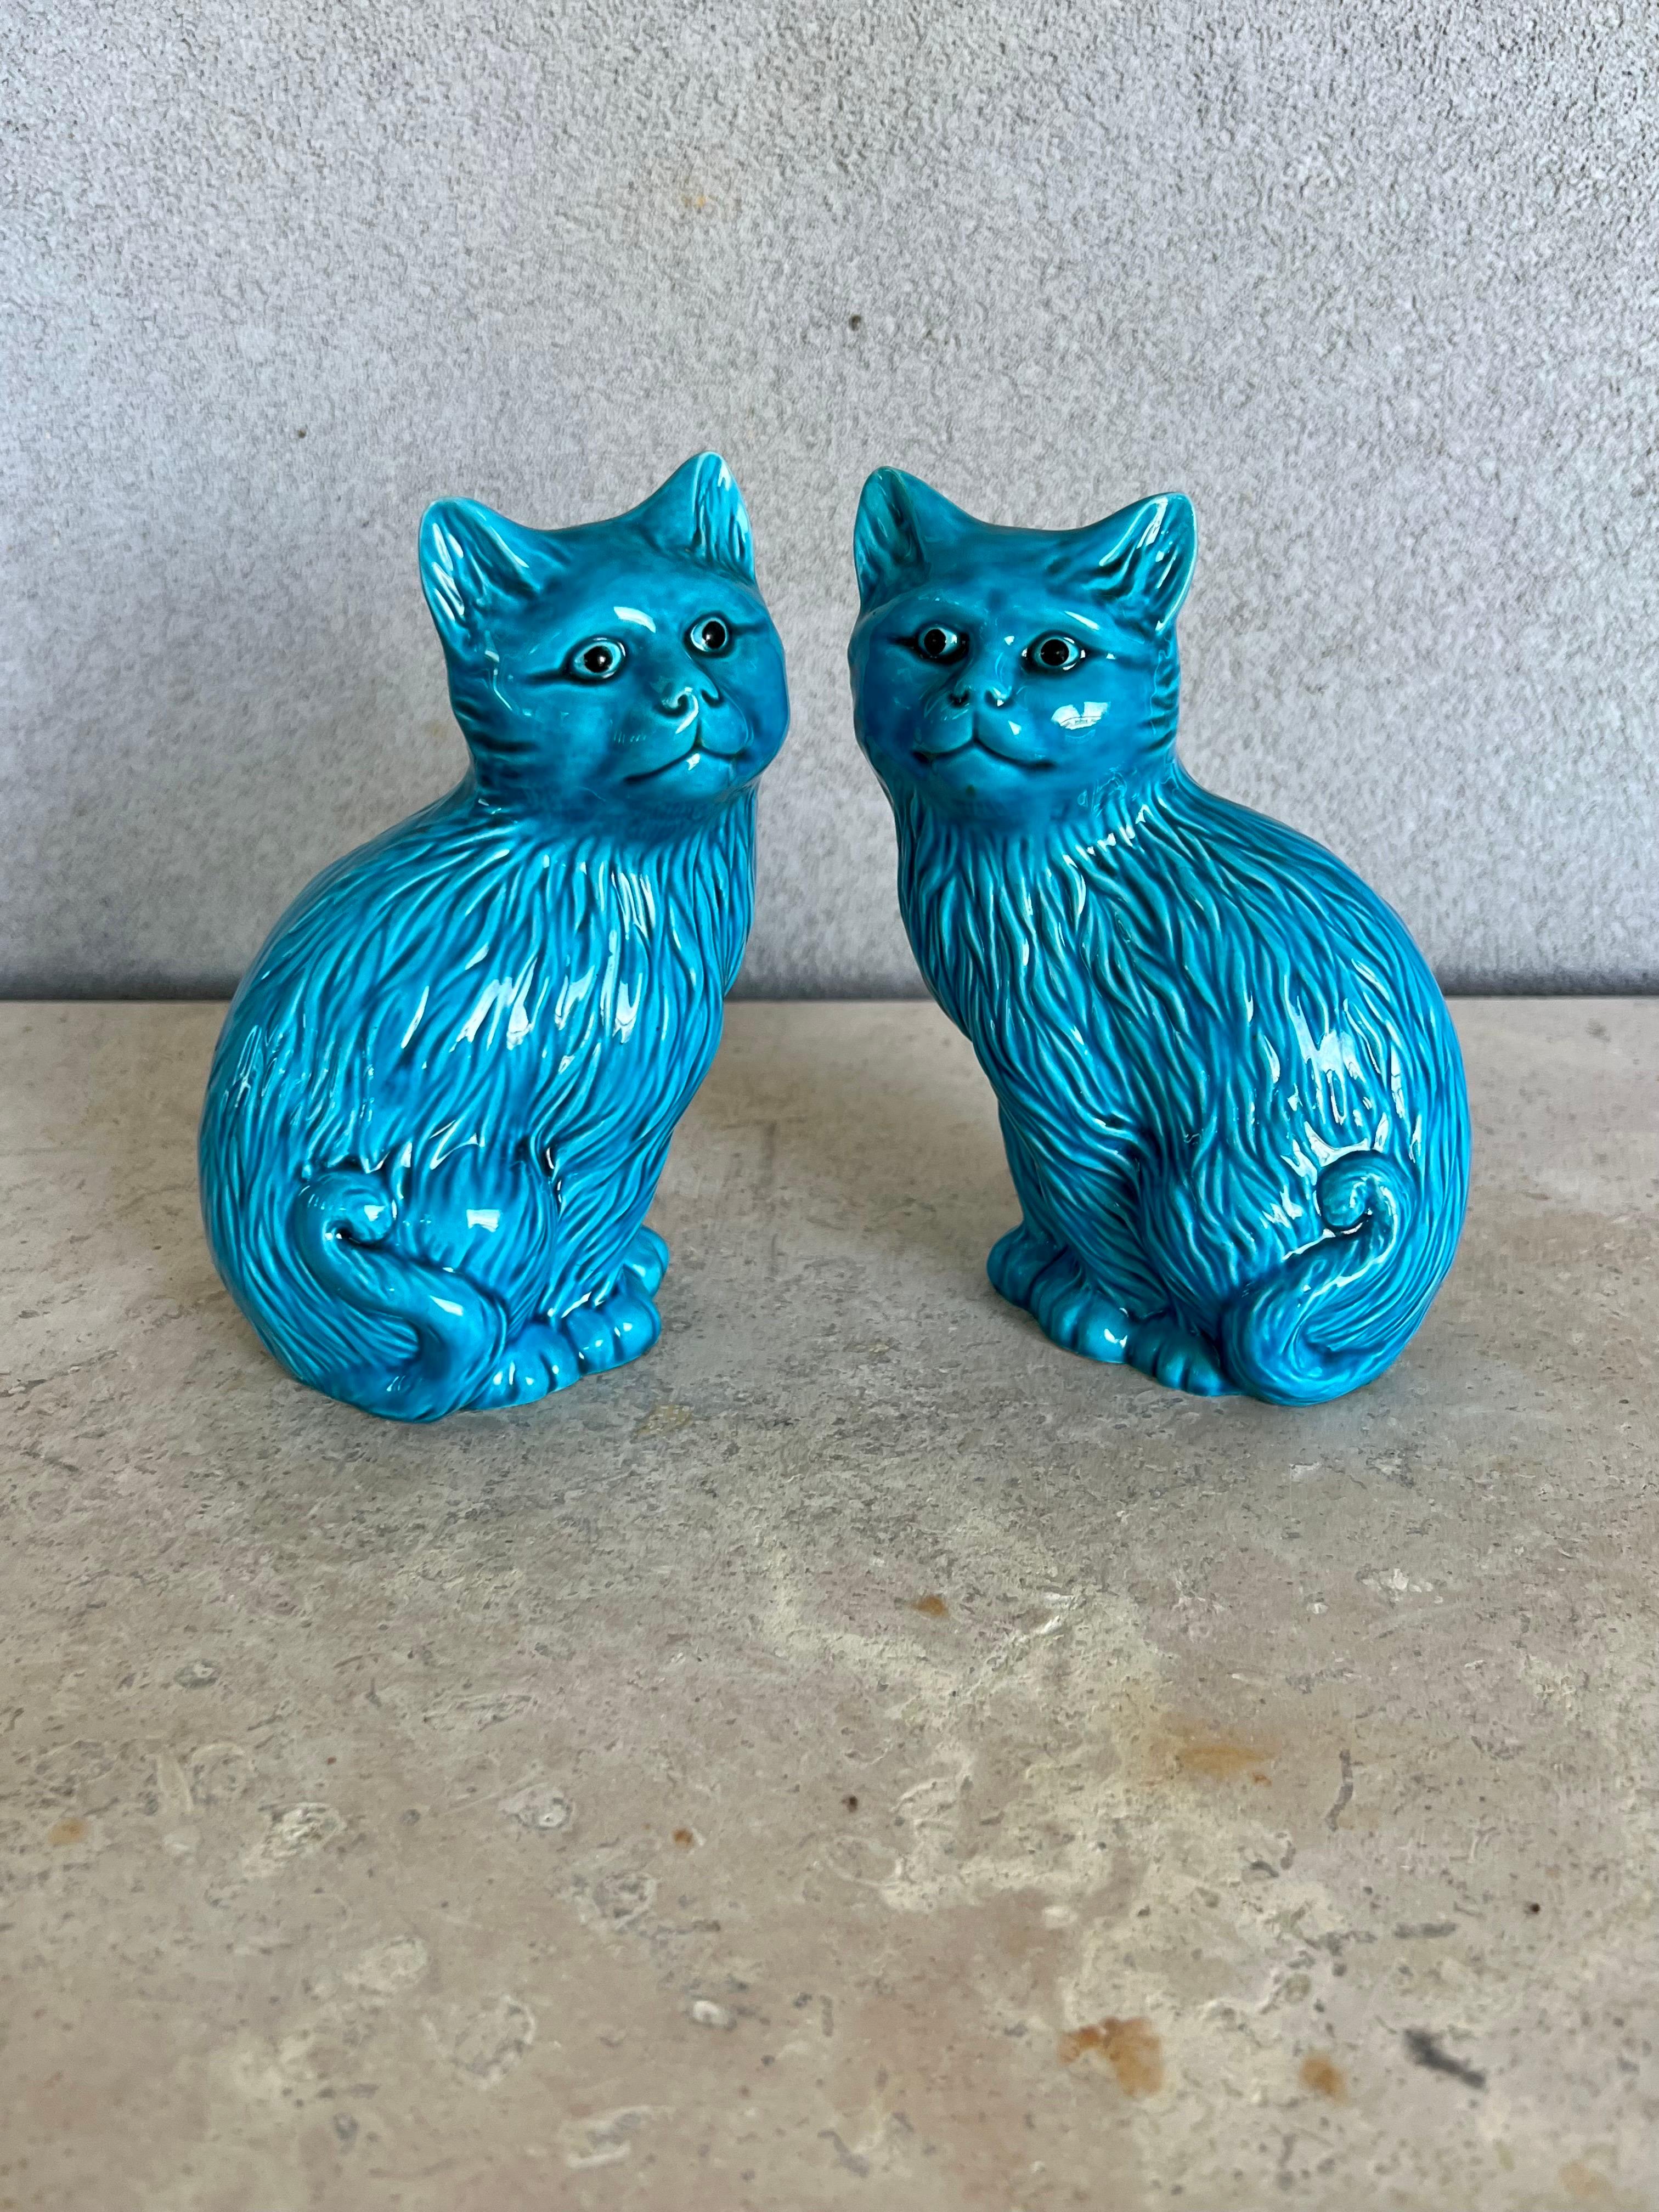 Beautiful pair of turquoise blue ceramic cat figurines. This is a left and right matching pair of Asian blue art pottery cats, ceramic cat statues that face each other. Lovely vivid shade of glossy blue/ turquoise and they have very nice